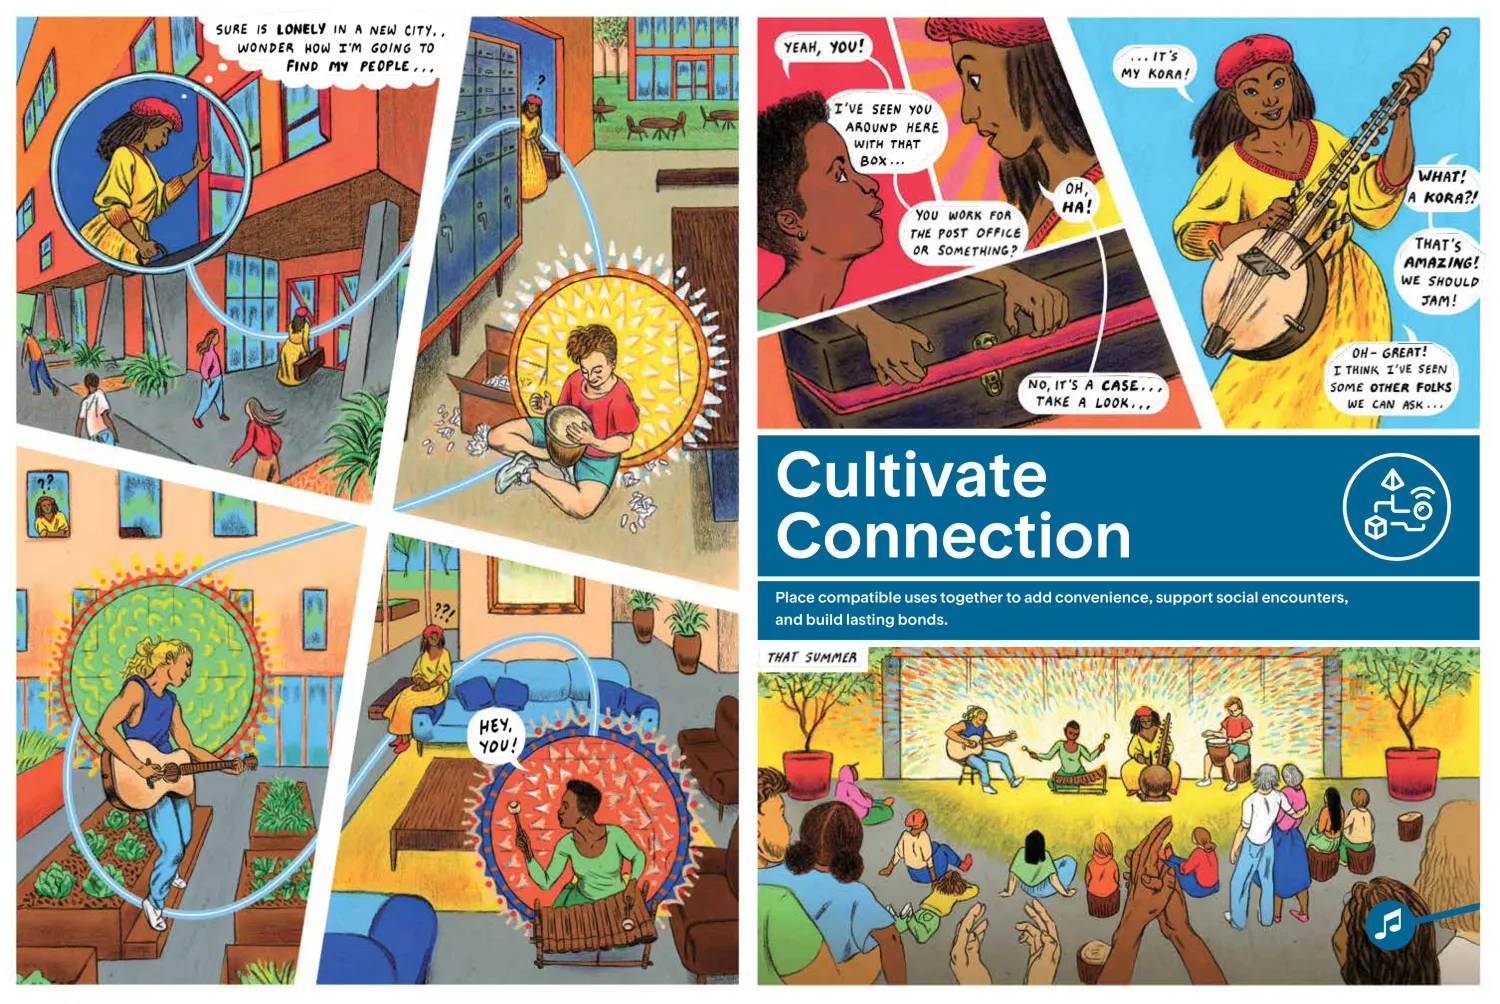 Comic-strip style illustration showing a story of a tentative new resident finding community with the help of connections and social spaces in the buidling.